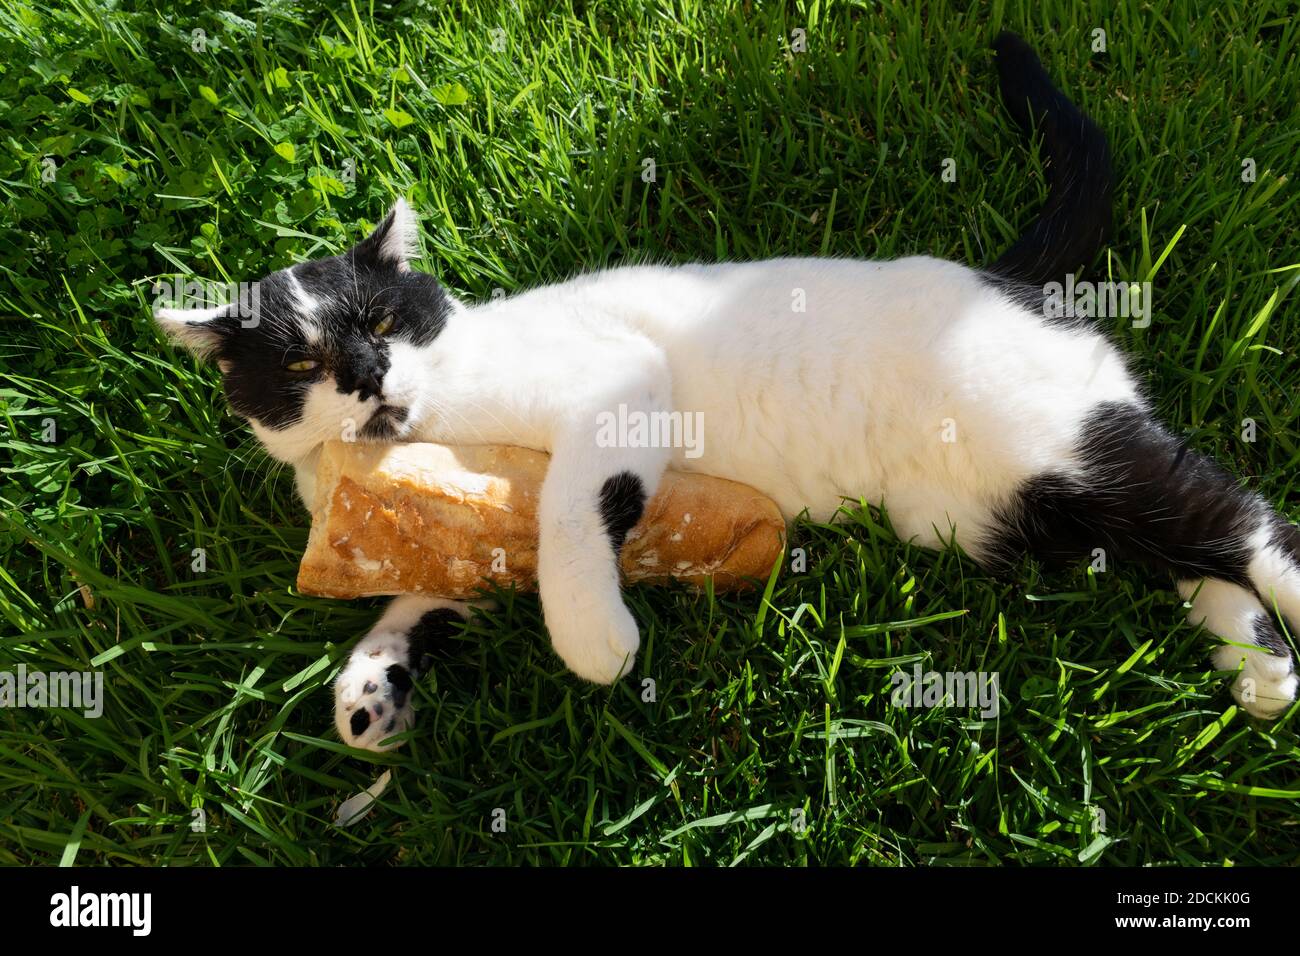 A closeup shot of an adorable cat with a baguette lying on the green grass Stock Photo